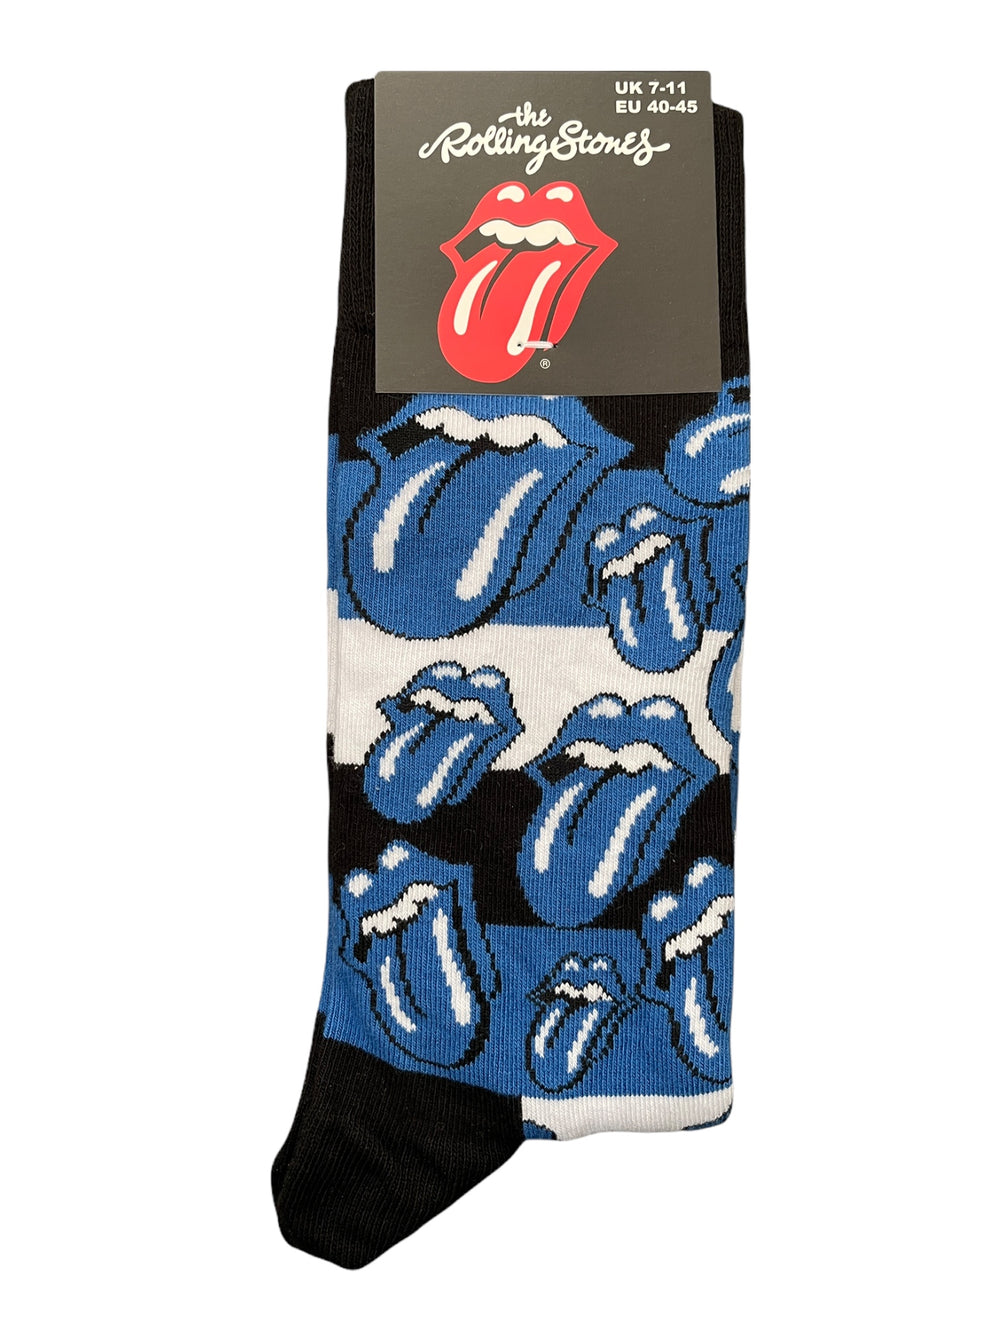 Rolling Stones The - BLUE TONGUES Official Product 1 Pair Jacquard Socks NEW